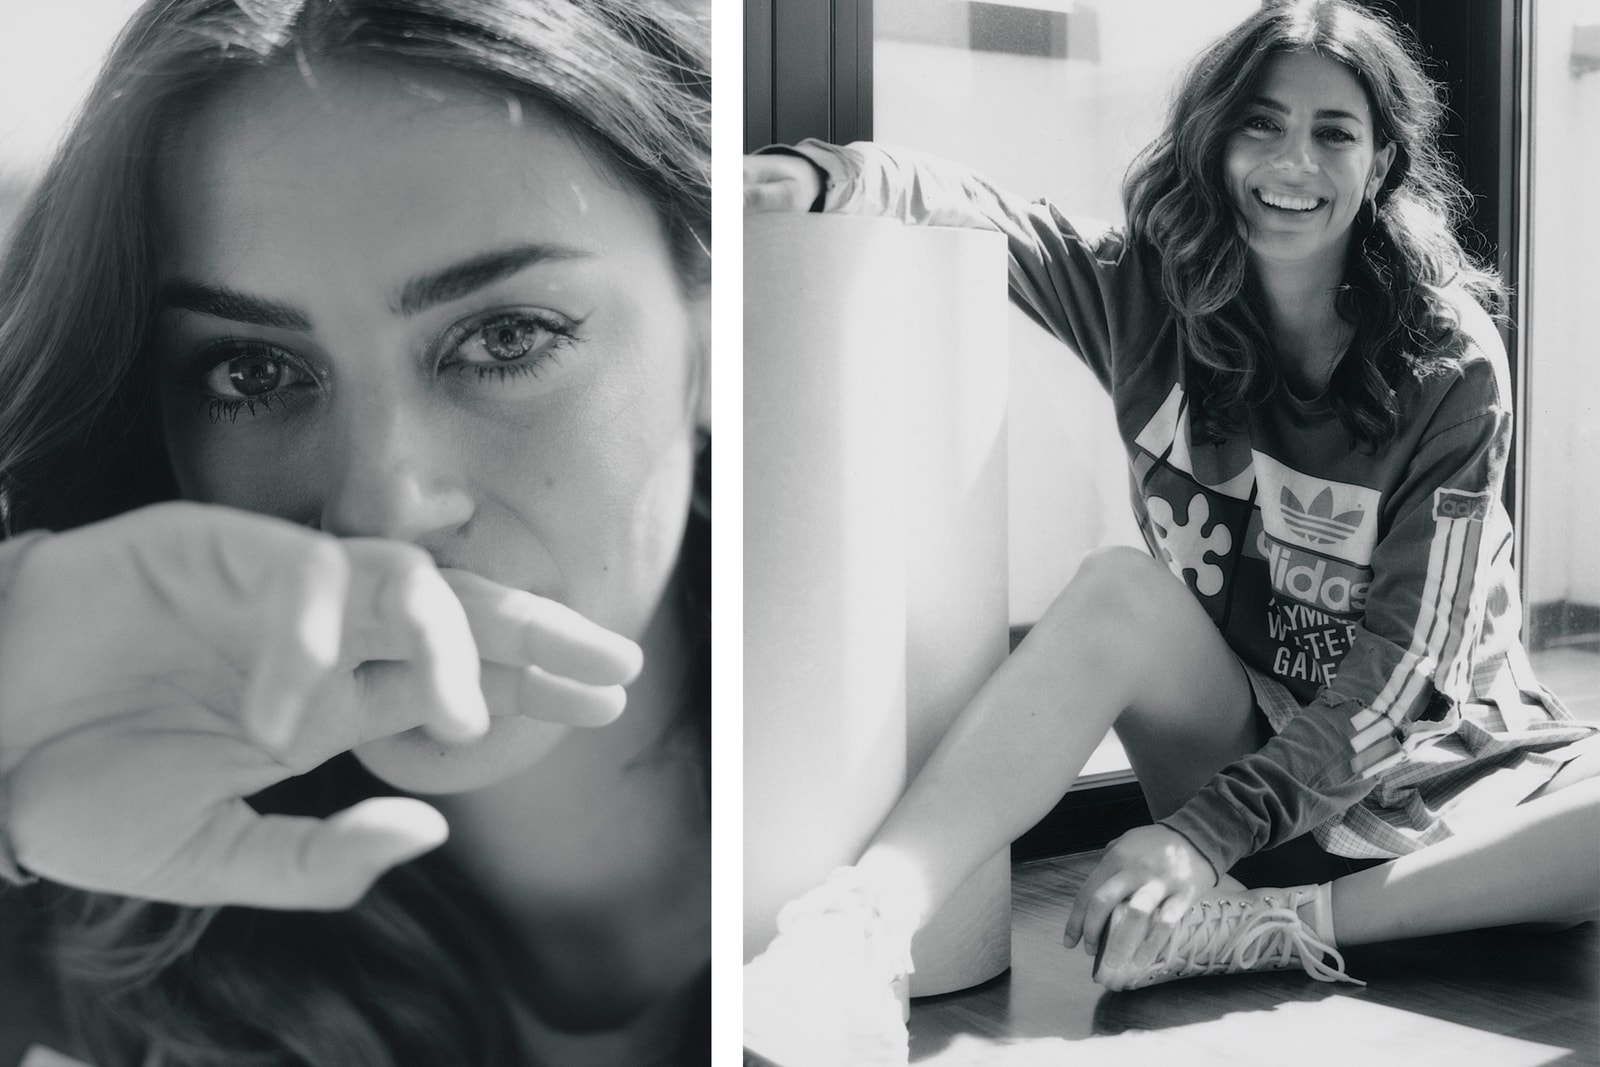 Lorenza Izzo on Working with Quentin Tarantino Leonardo Dicaprio Brad Pitt Margot Robbie Once Upon A Time In Hollywood Actress Interview 